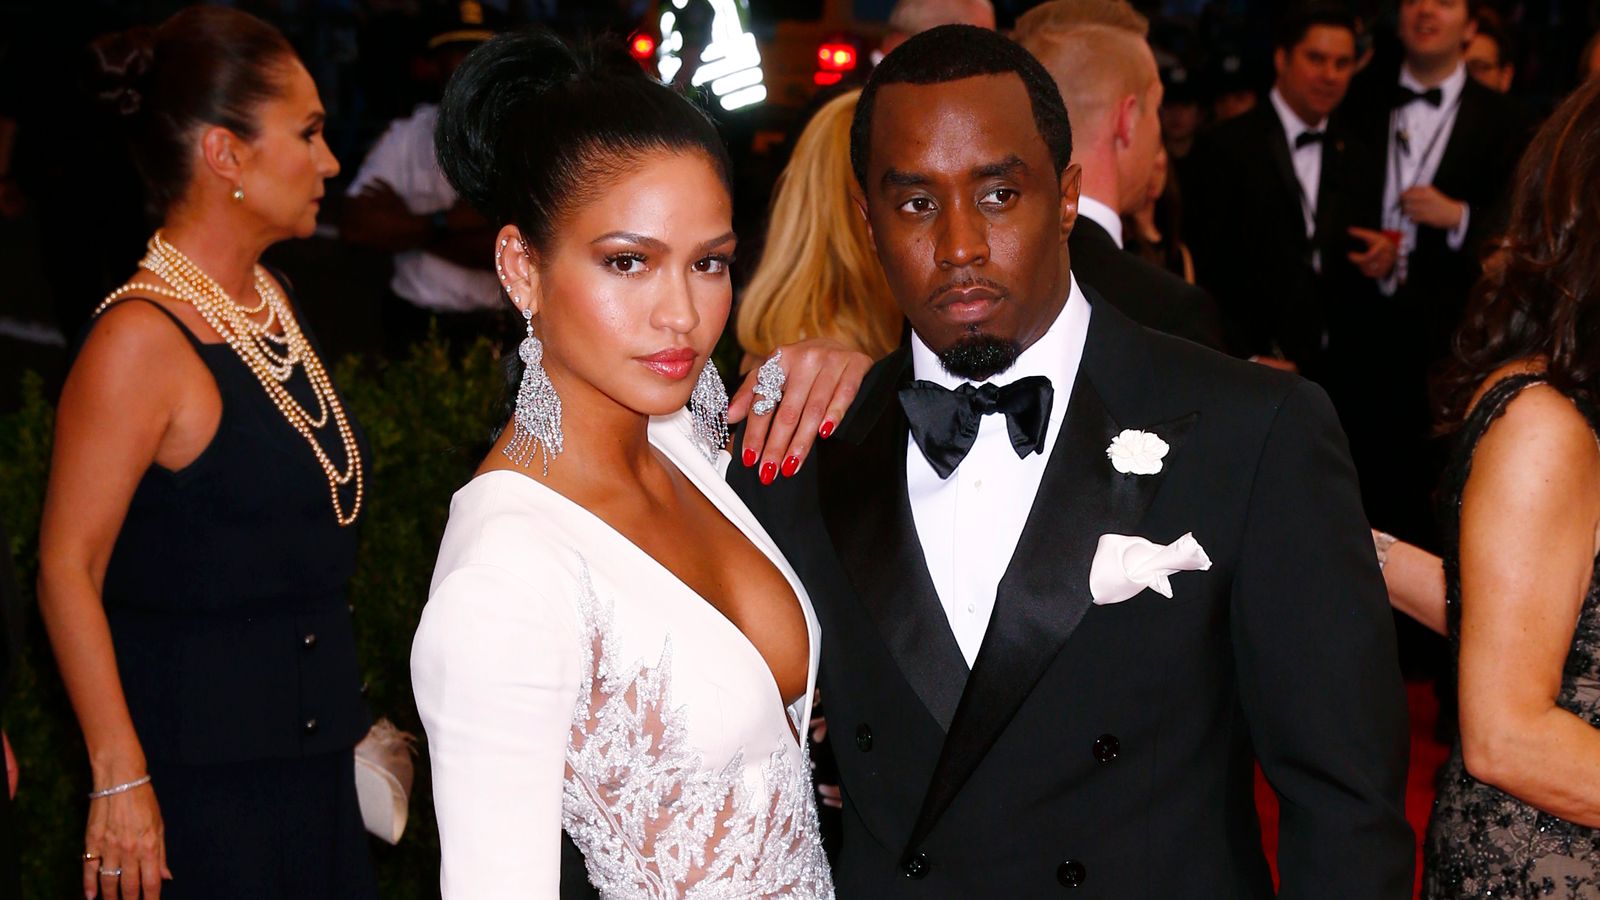 Rapper Sean 'Diddy' Combs settles lawsuit after singer Cassie accused him of abuse